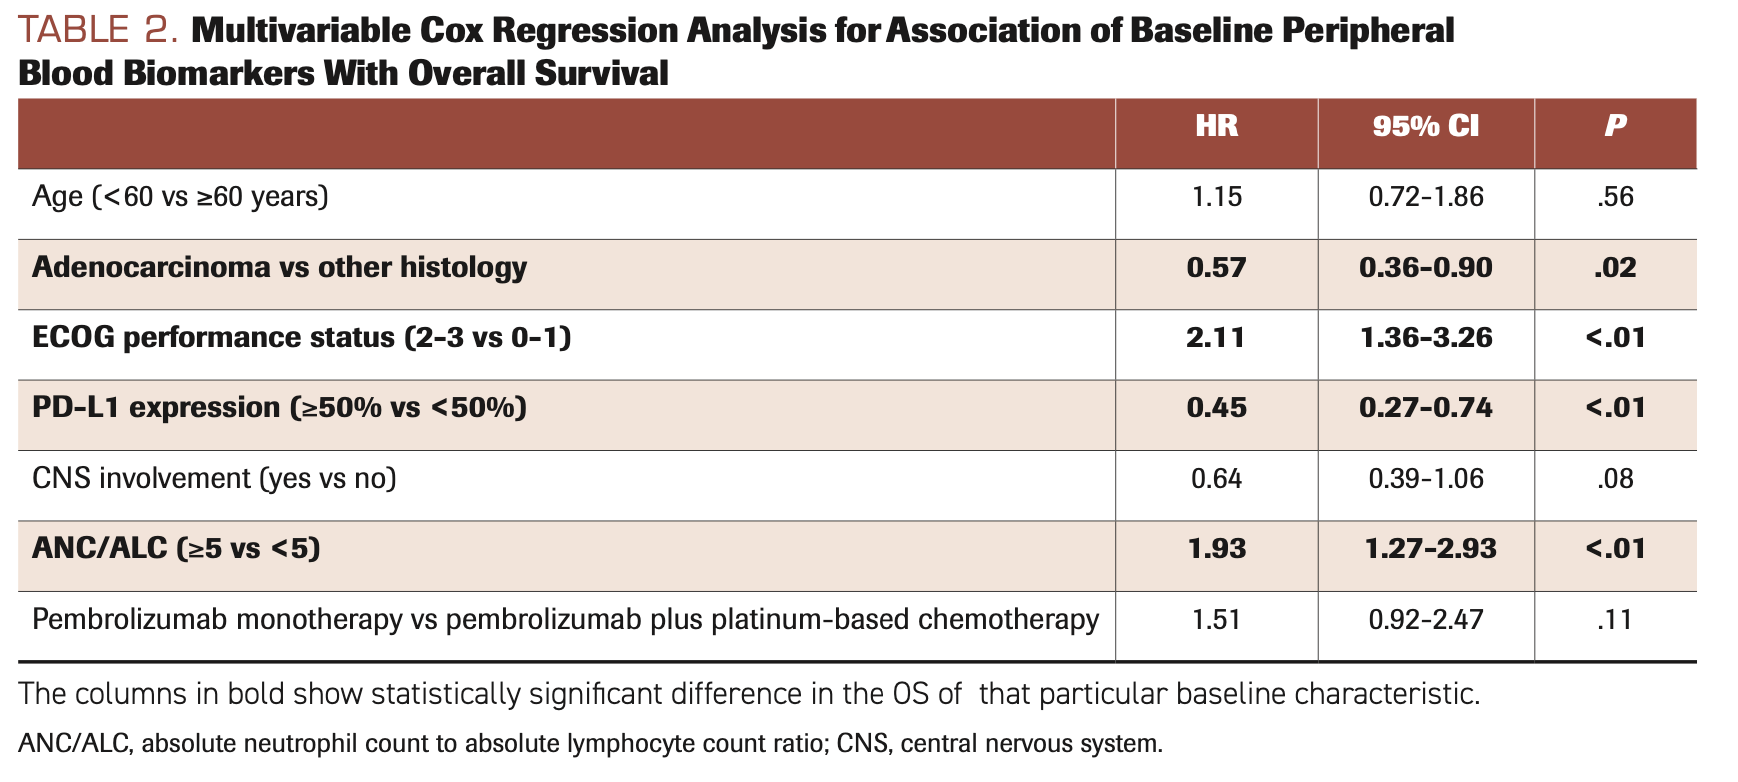 TABLE 2. Multivariable Cox Regression Analysis for Association of Baseline Peripheral Blood Biomarkers With Overall Survival